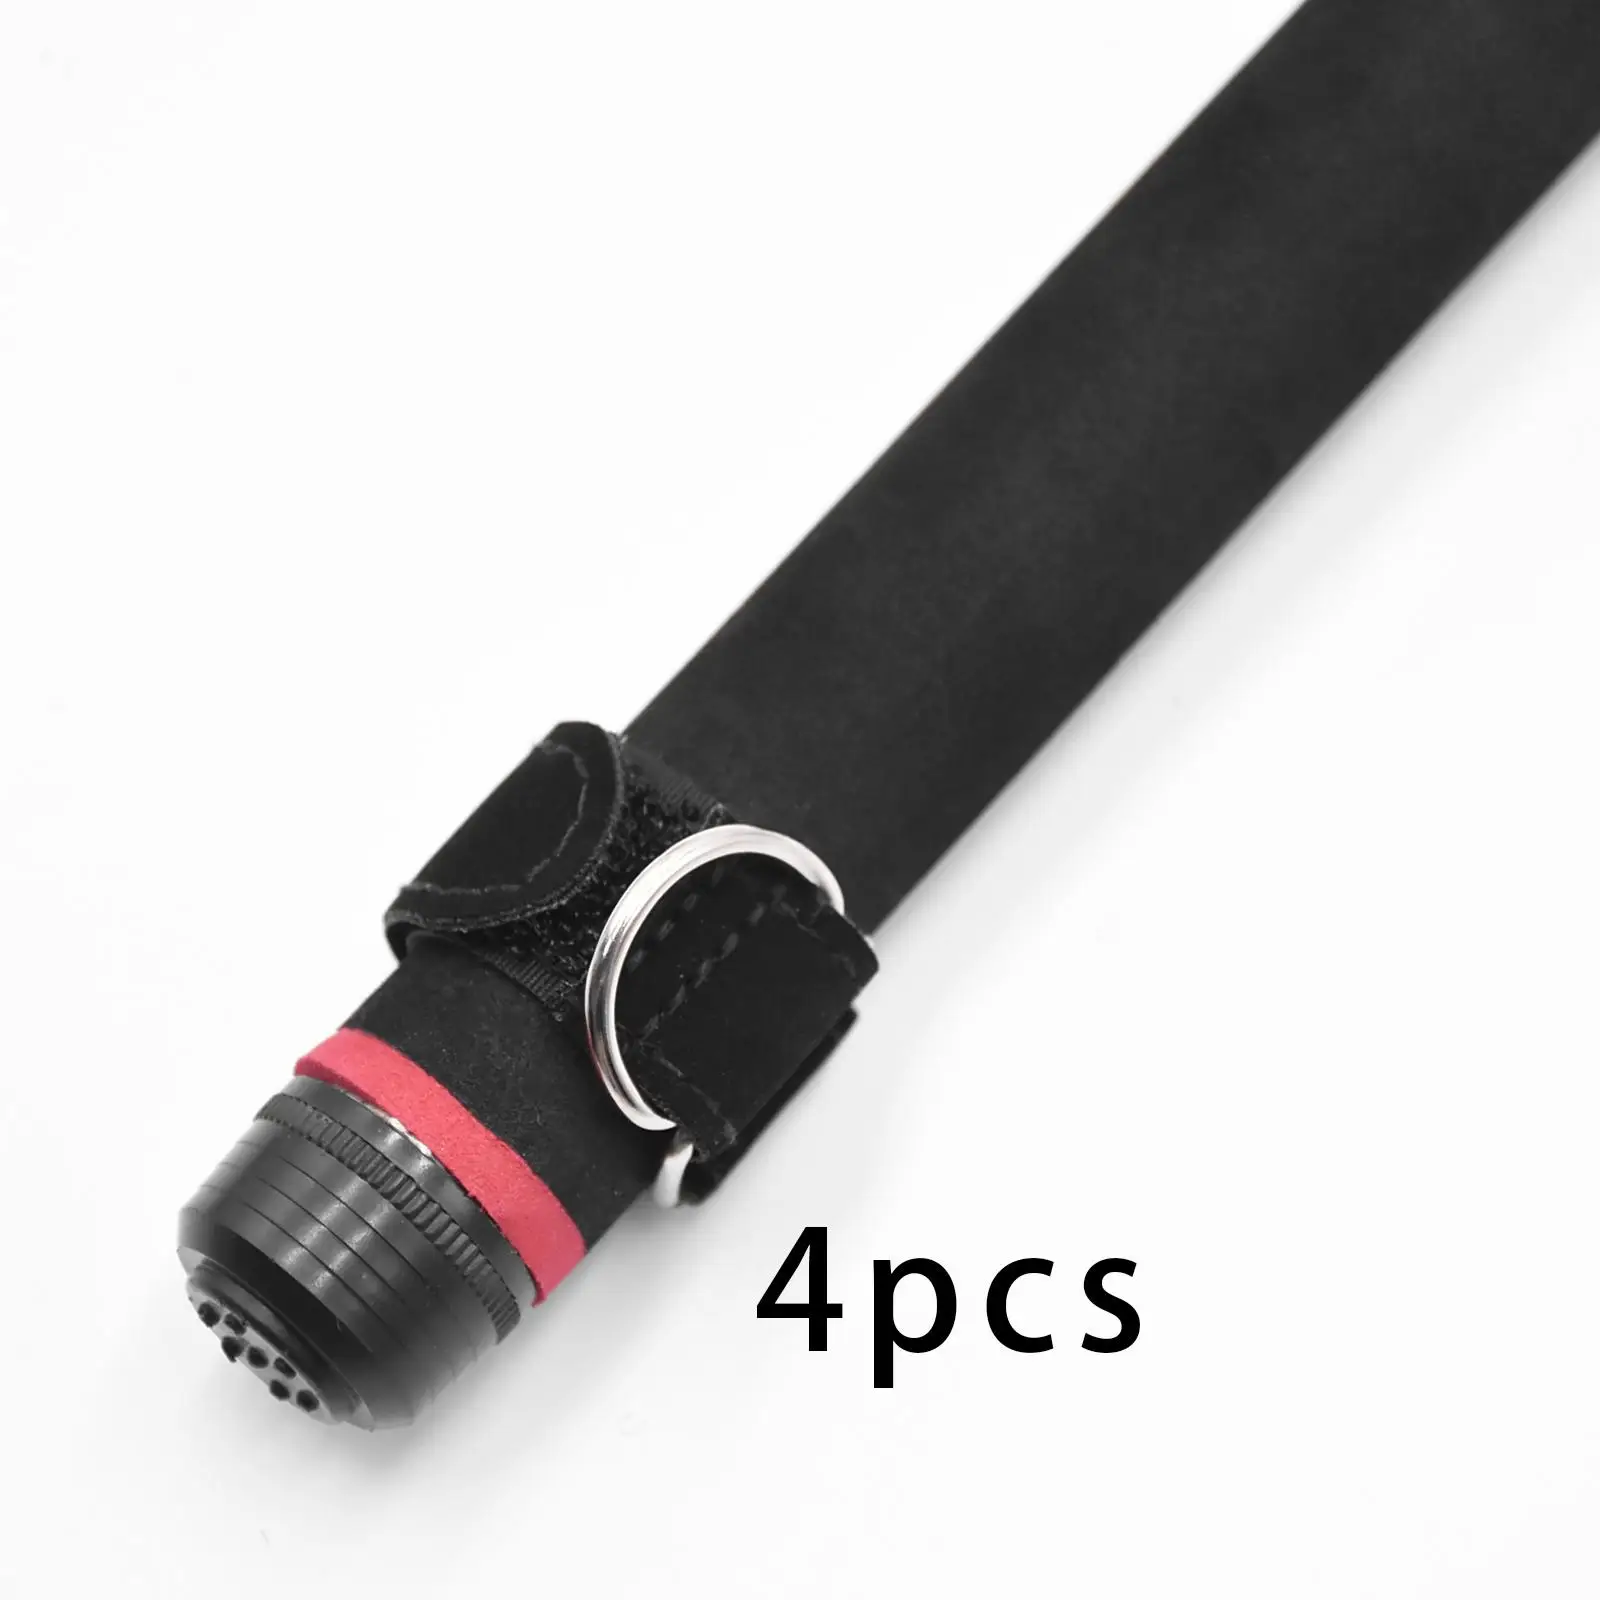 4Pcs Fishing Rod Ties Fixing Fastener Wrap Nylon Fishing Pole Holders Straps for Casting Rods Fly Rods Outdoor Fishing Supplies